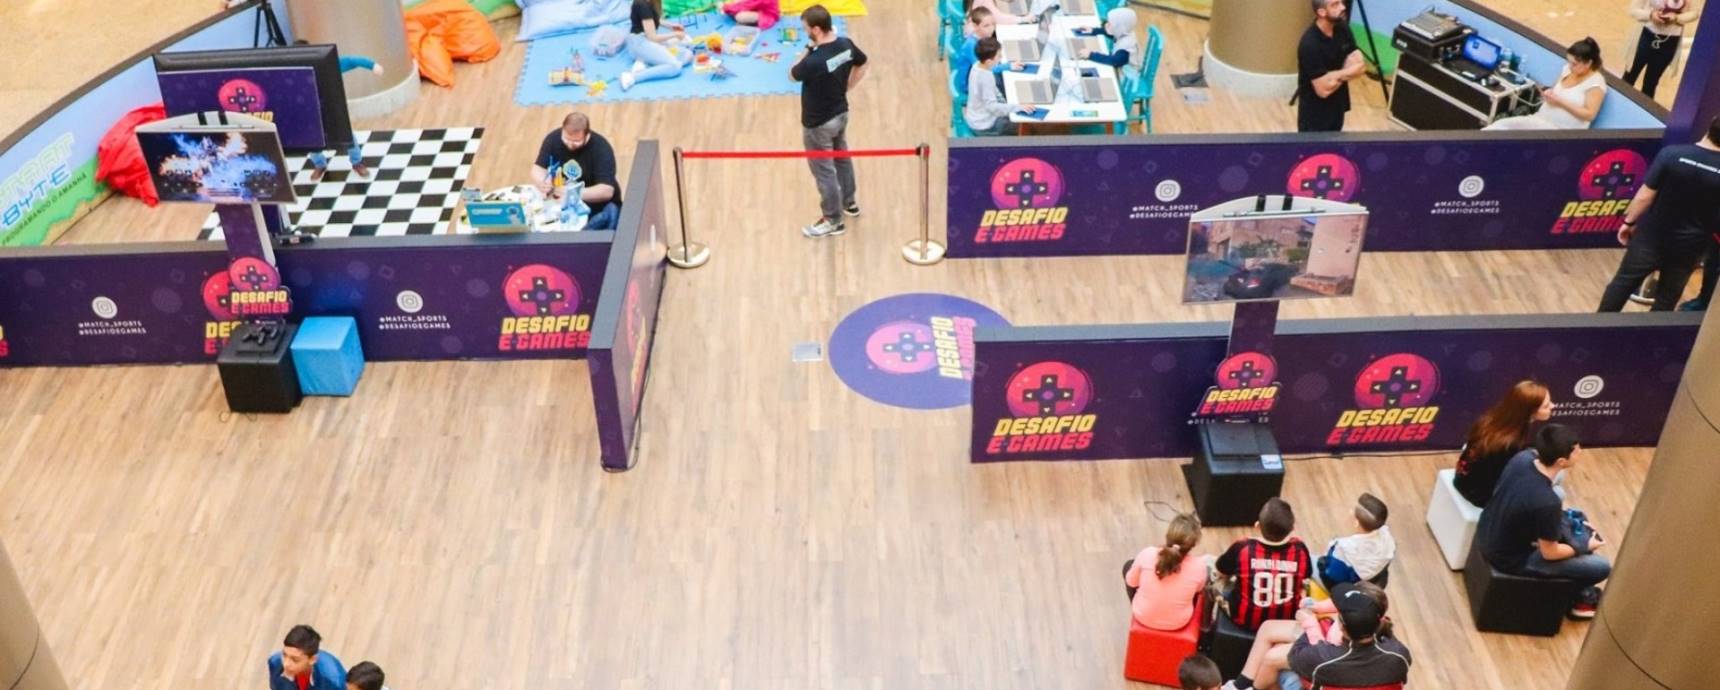 E-Games Challenge lands at Florianópolis International Airport for 10 days of fun and lots of geek culture